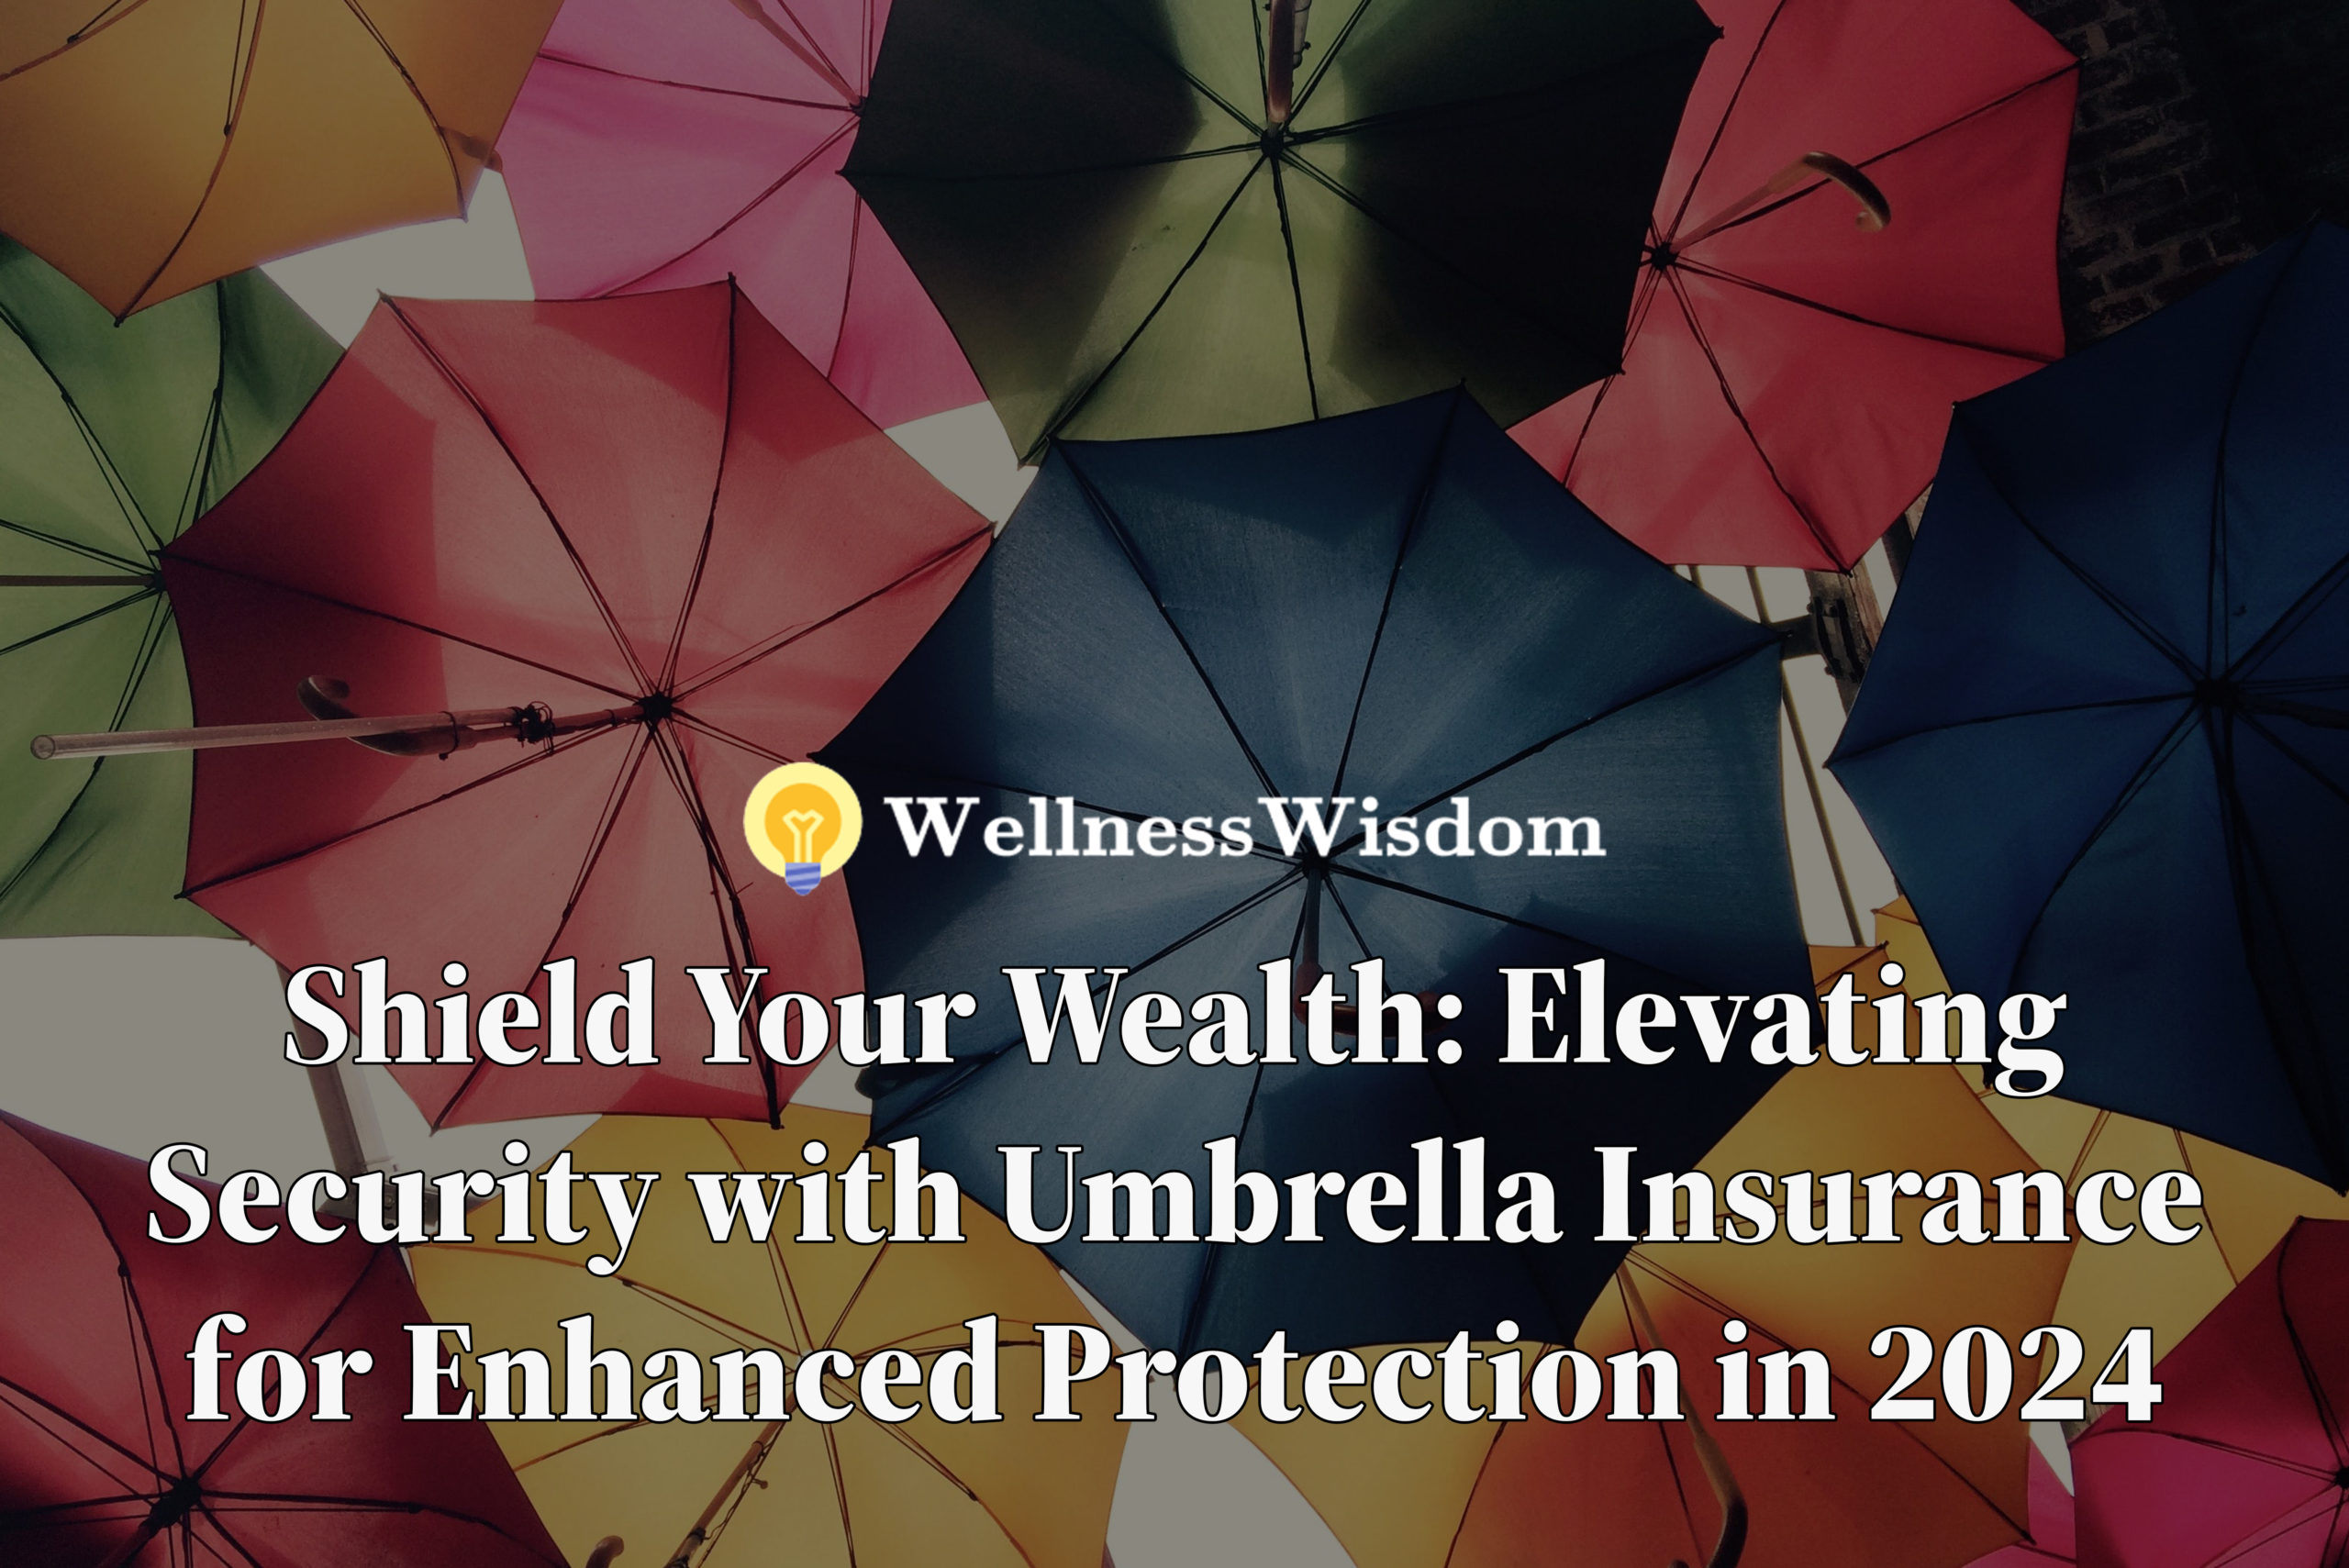 umbrella insurance, insurance coverage, liability protection, legal shield, asset protection, financial security, insurance benefits, worldwide coverage, lawsuit protection, umbrella policy, insurance premiums, insurance portfolio, additional coverage, insurance options, peace of mind, financial stability, risk management, insurance reassurance, insurance safeguards, insurance peace, enhanced protection